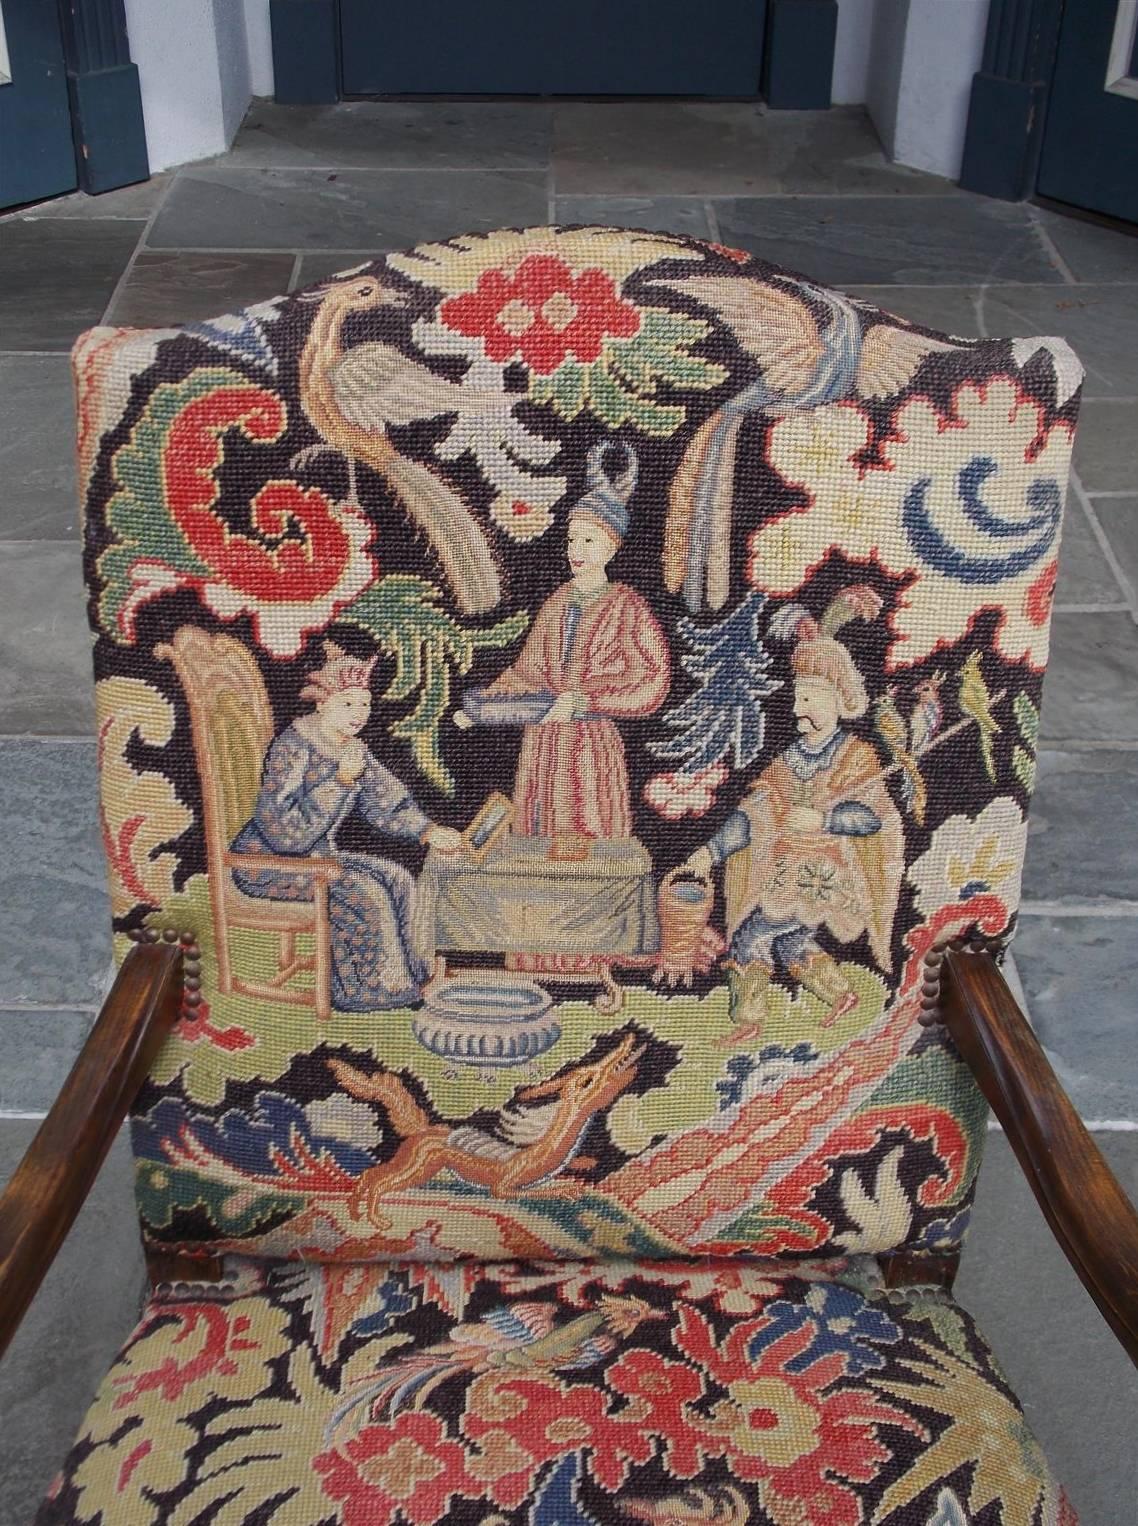 Hand-Carved French Walnut Acanthus Armchair with Decorative Figural Needlepoint, Circa 1840